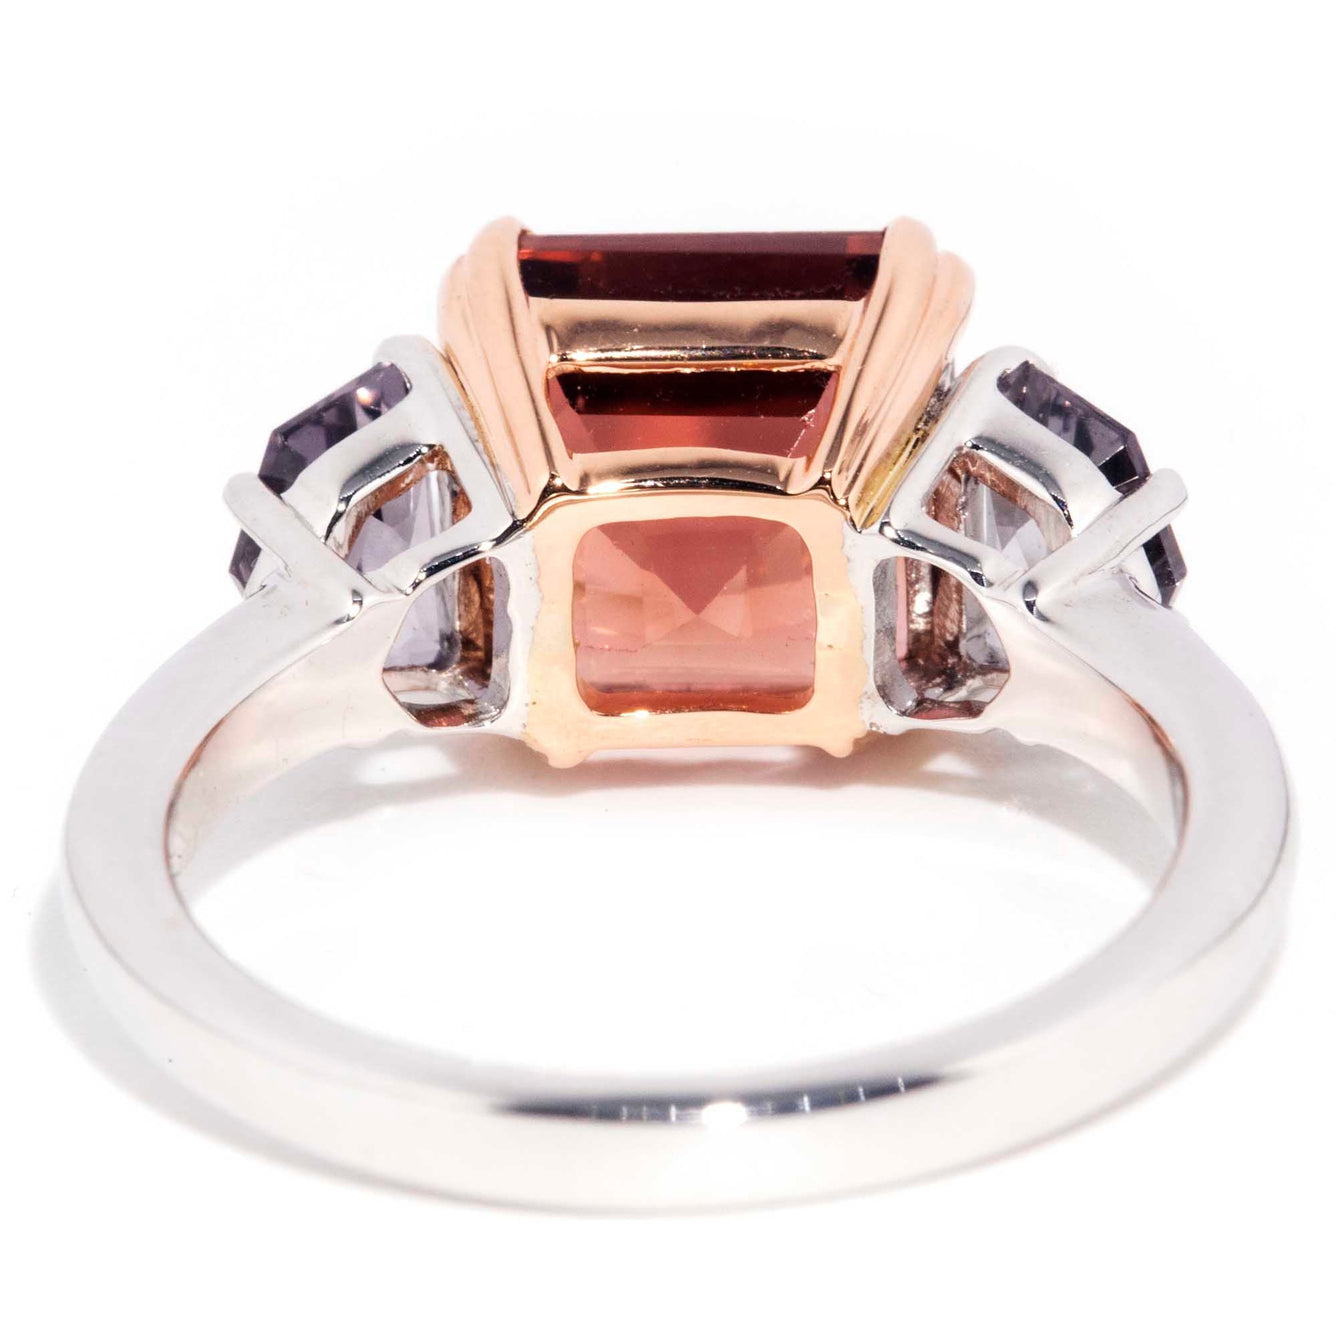 Jimena 18ct Gold Bright Peach Tourmaline & Cadillac Cut Spinel Ring* OB Rings Imperial Jewellery 